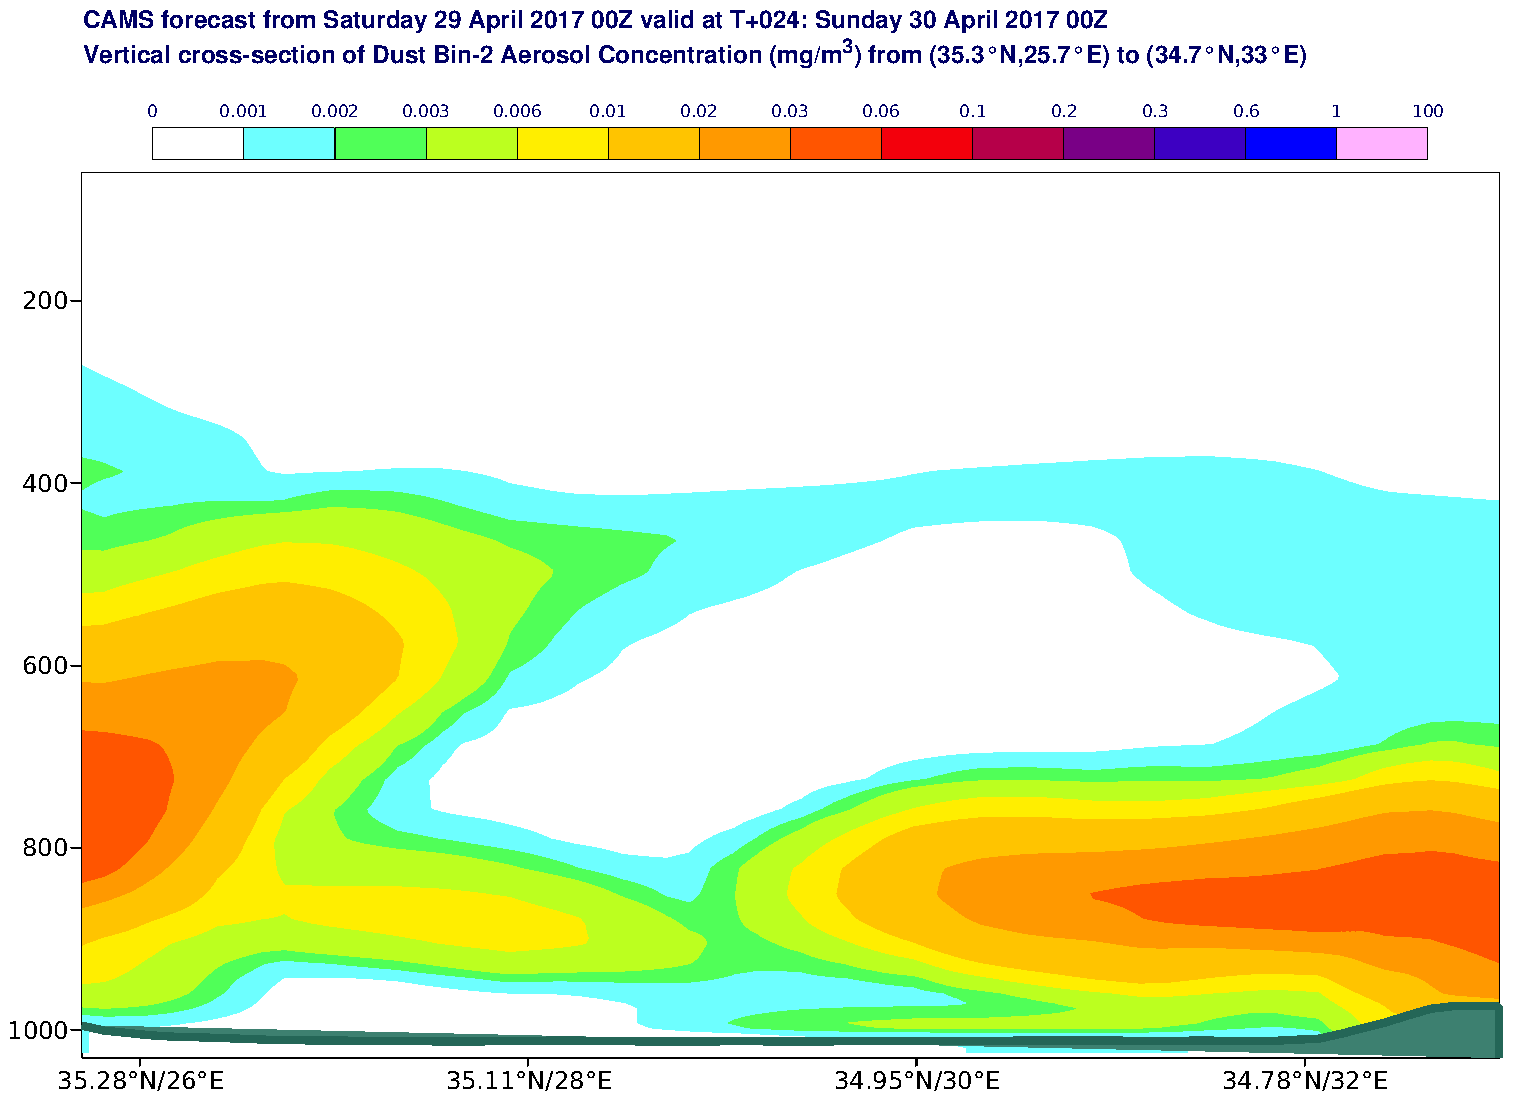 Vertical cross-section of Dust Bin-2 Aerosol Concentration (mg/m3) valid at T24 - 2017-04-30 00:00